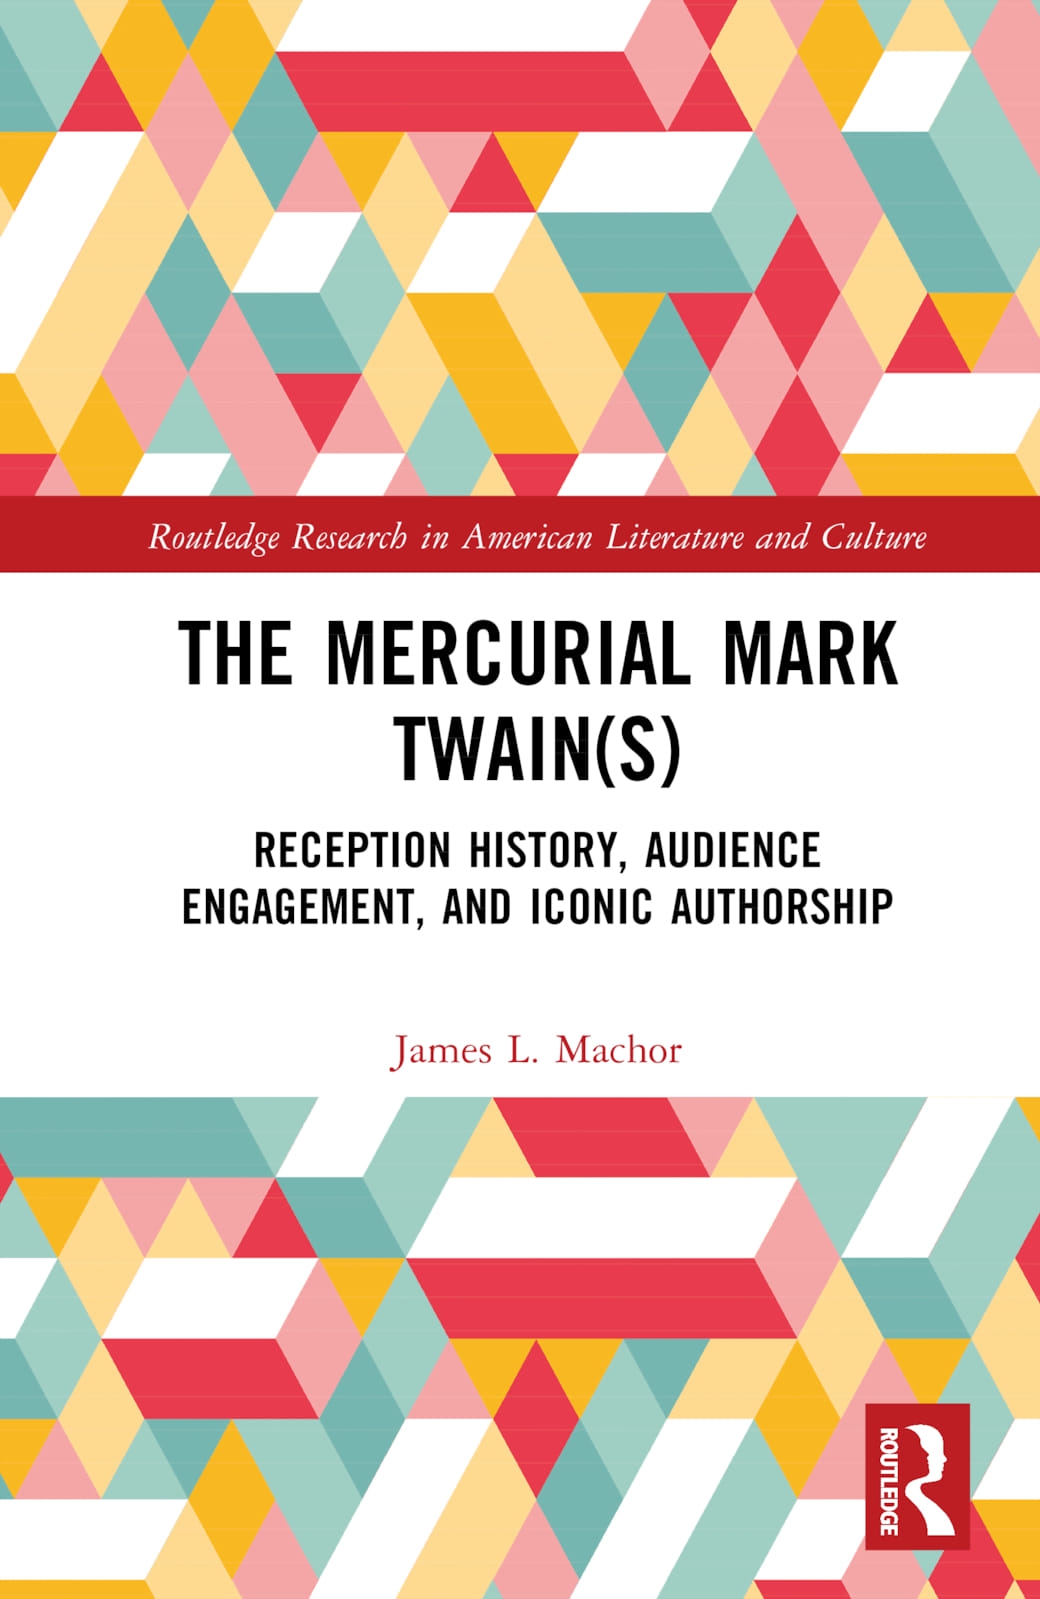 The Mercurial Mark Twain(s): Reception History and Iconic Authorship